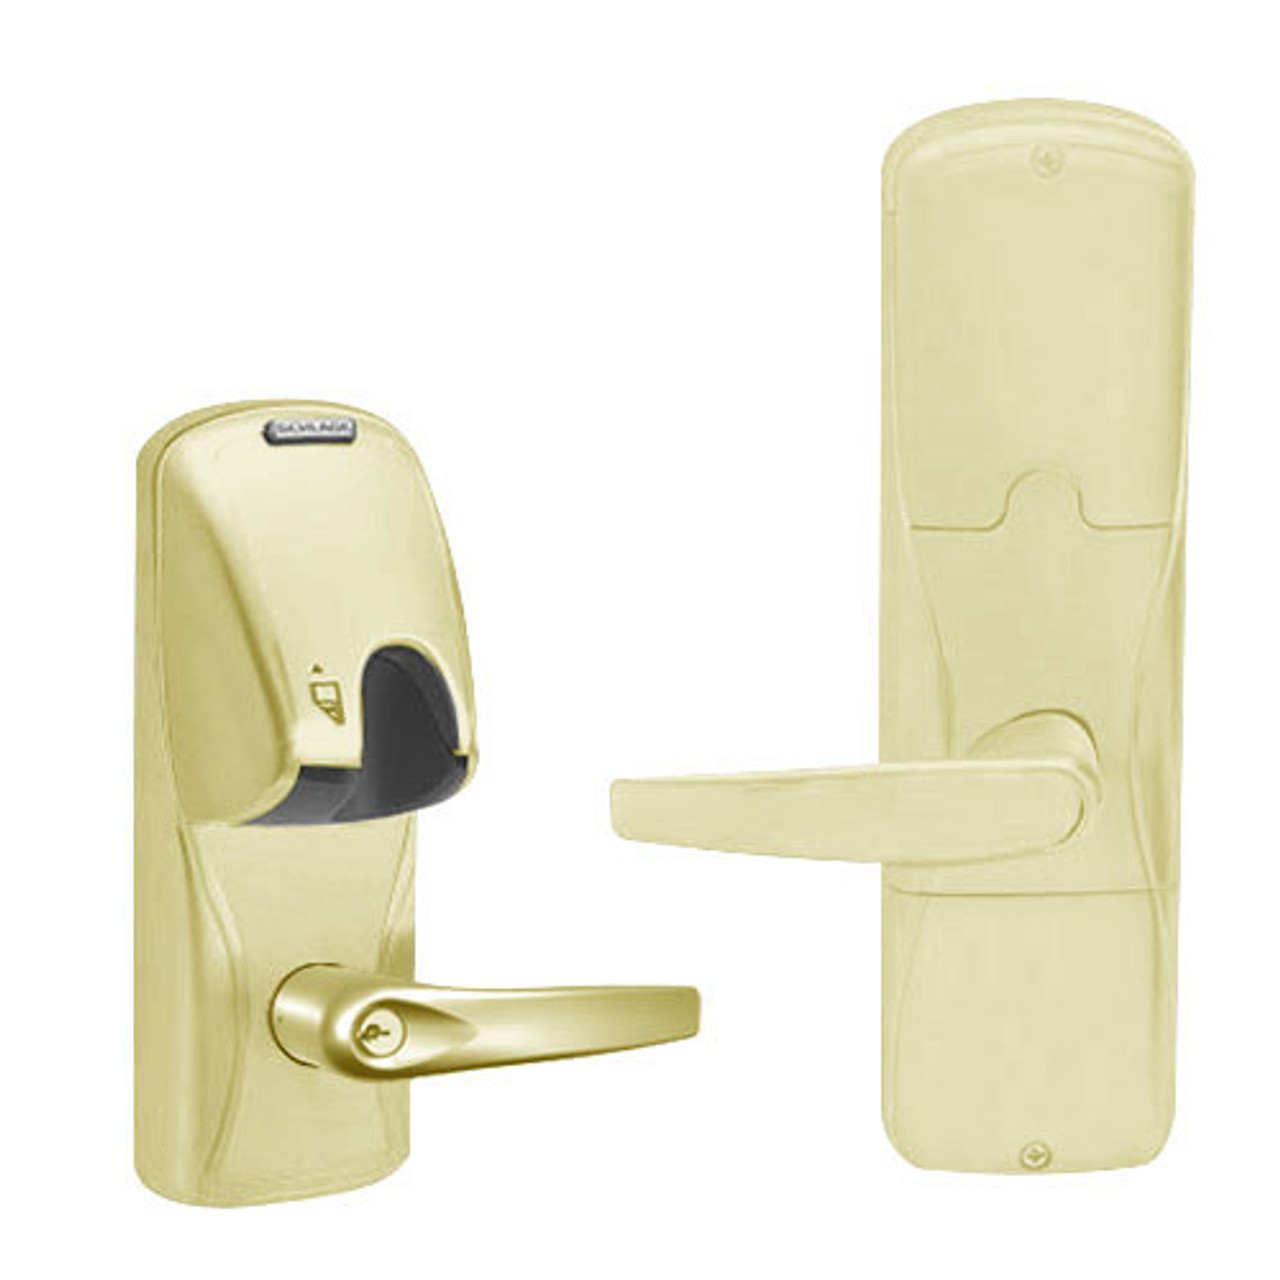 AD200-MD-40-MG-ATH-PD-606 Schlage Privacy Mortise Deadbolt Magnetic Stripe(Insert) Lock with Athens Lever in Satin Brass